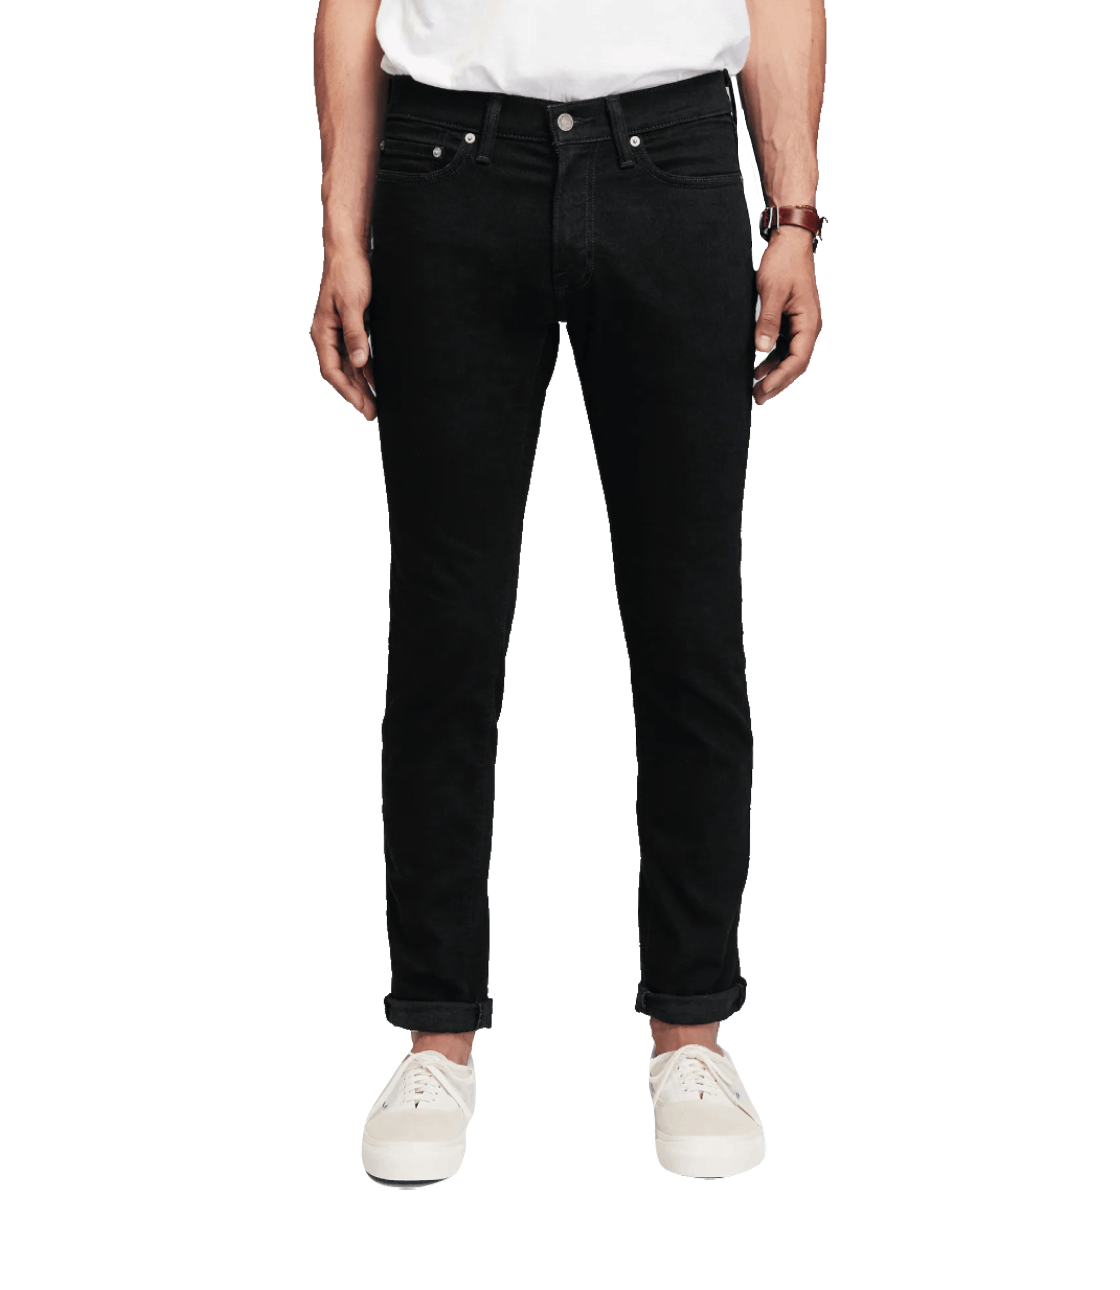 Quần Jeans Abercrombie & Fitch Super Skinny 12